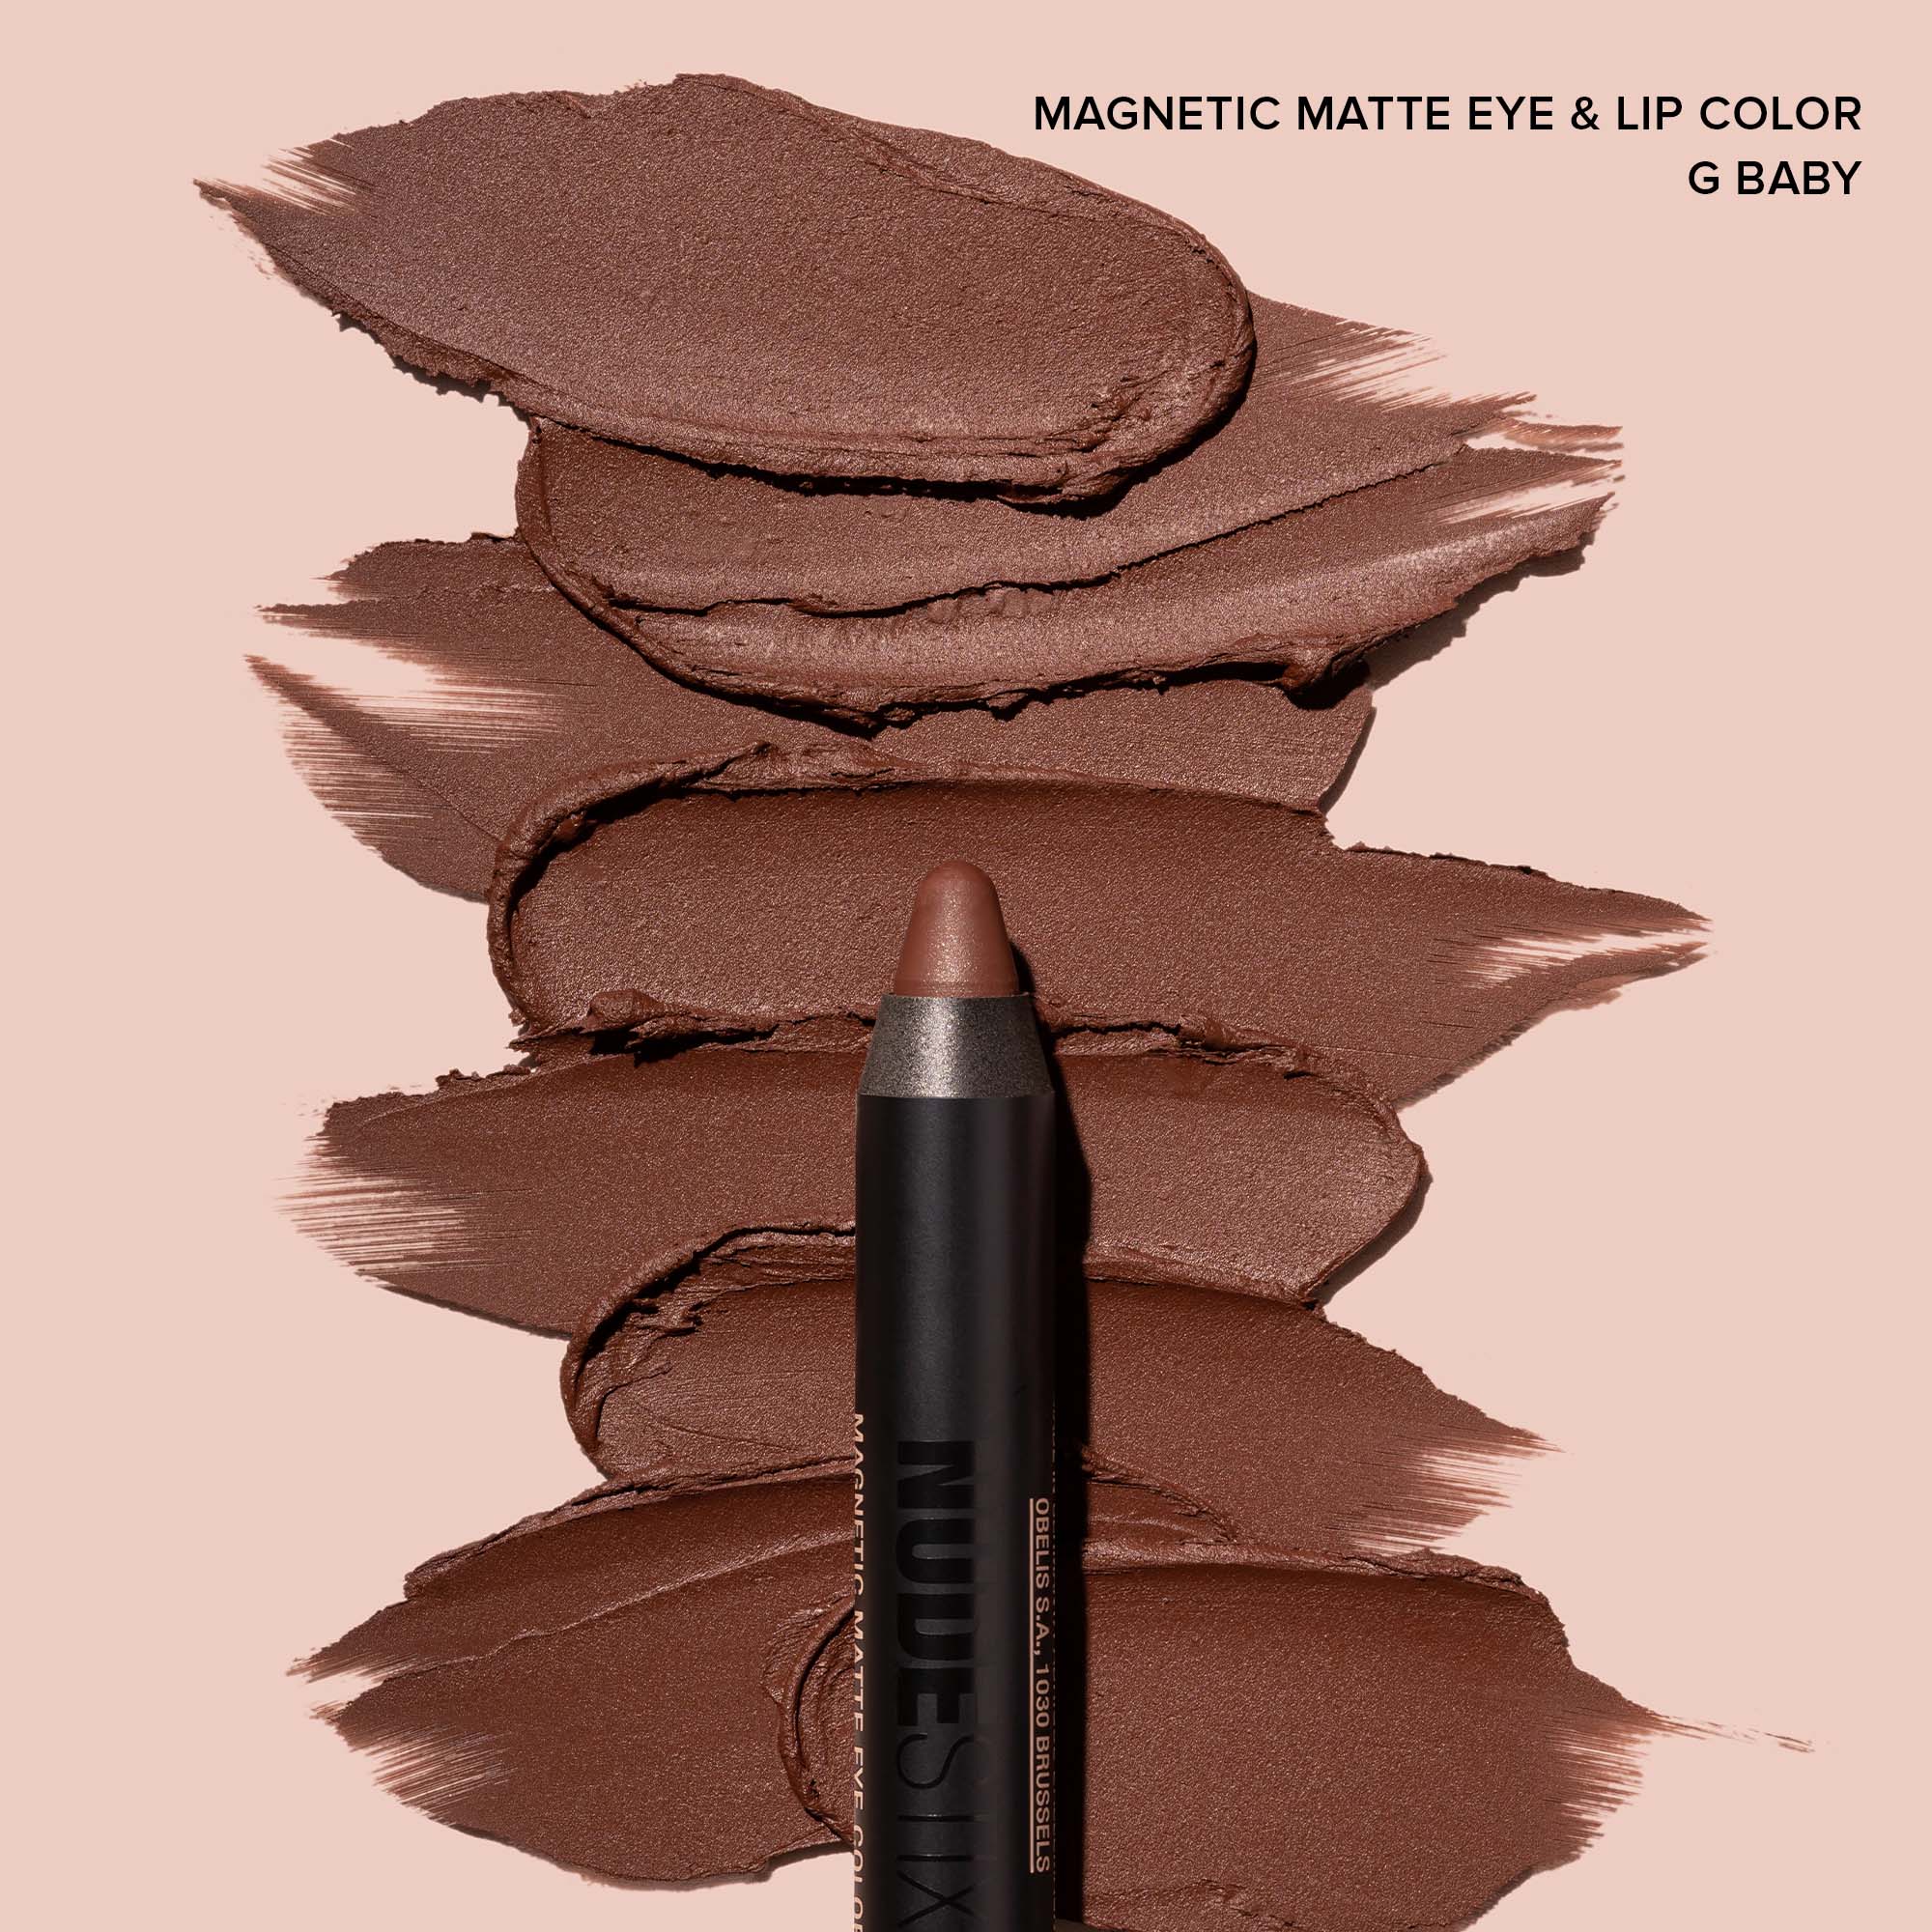 Magnetic Matte Lip Color G Baby with texture swatches